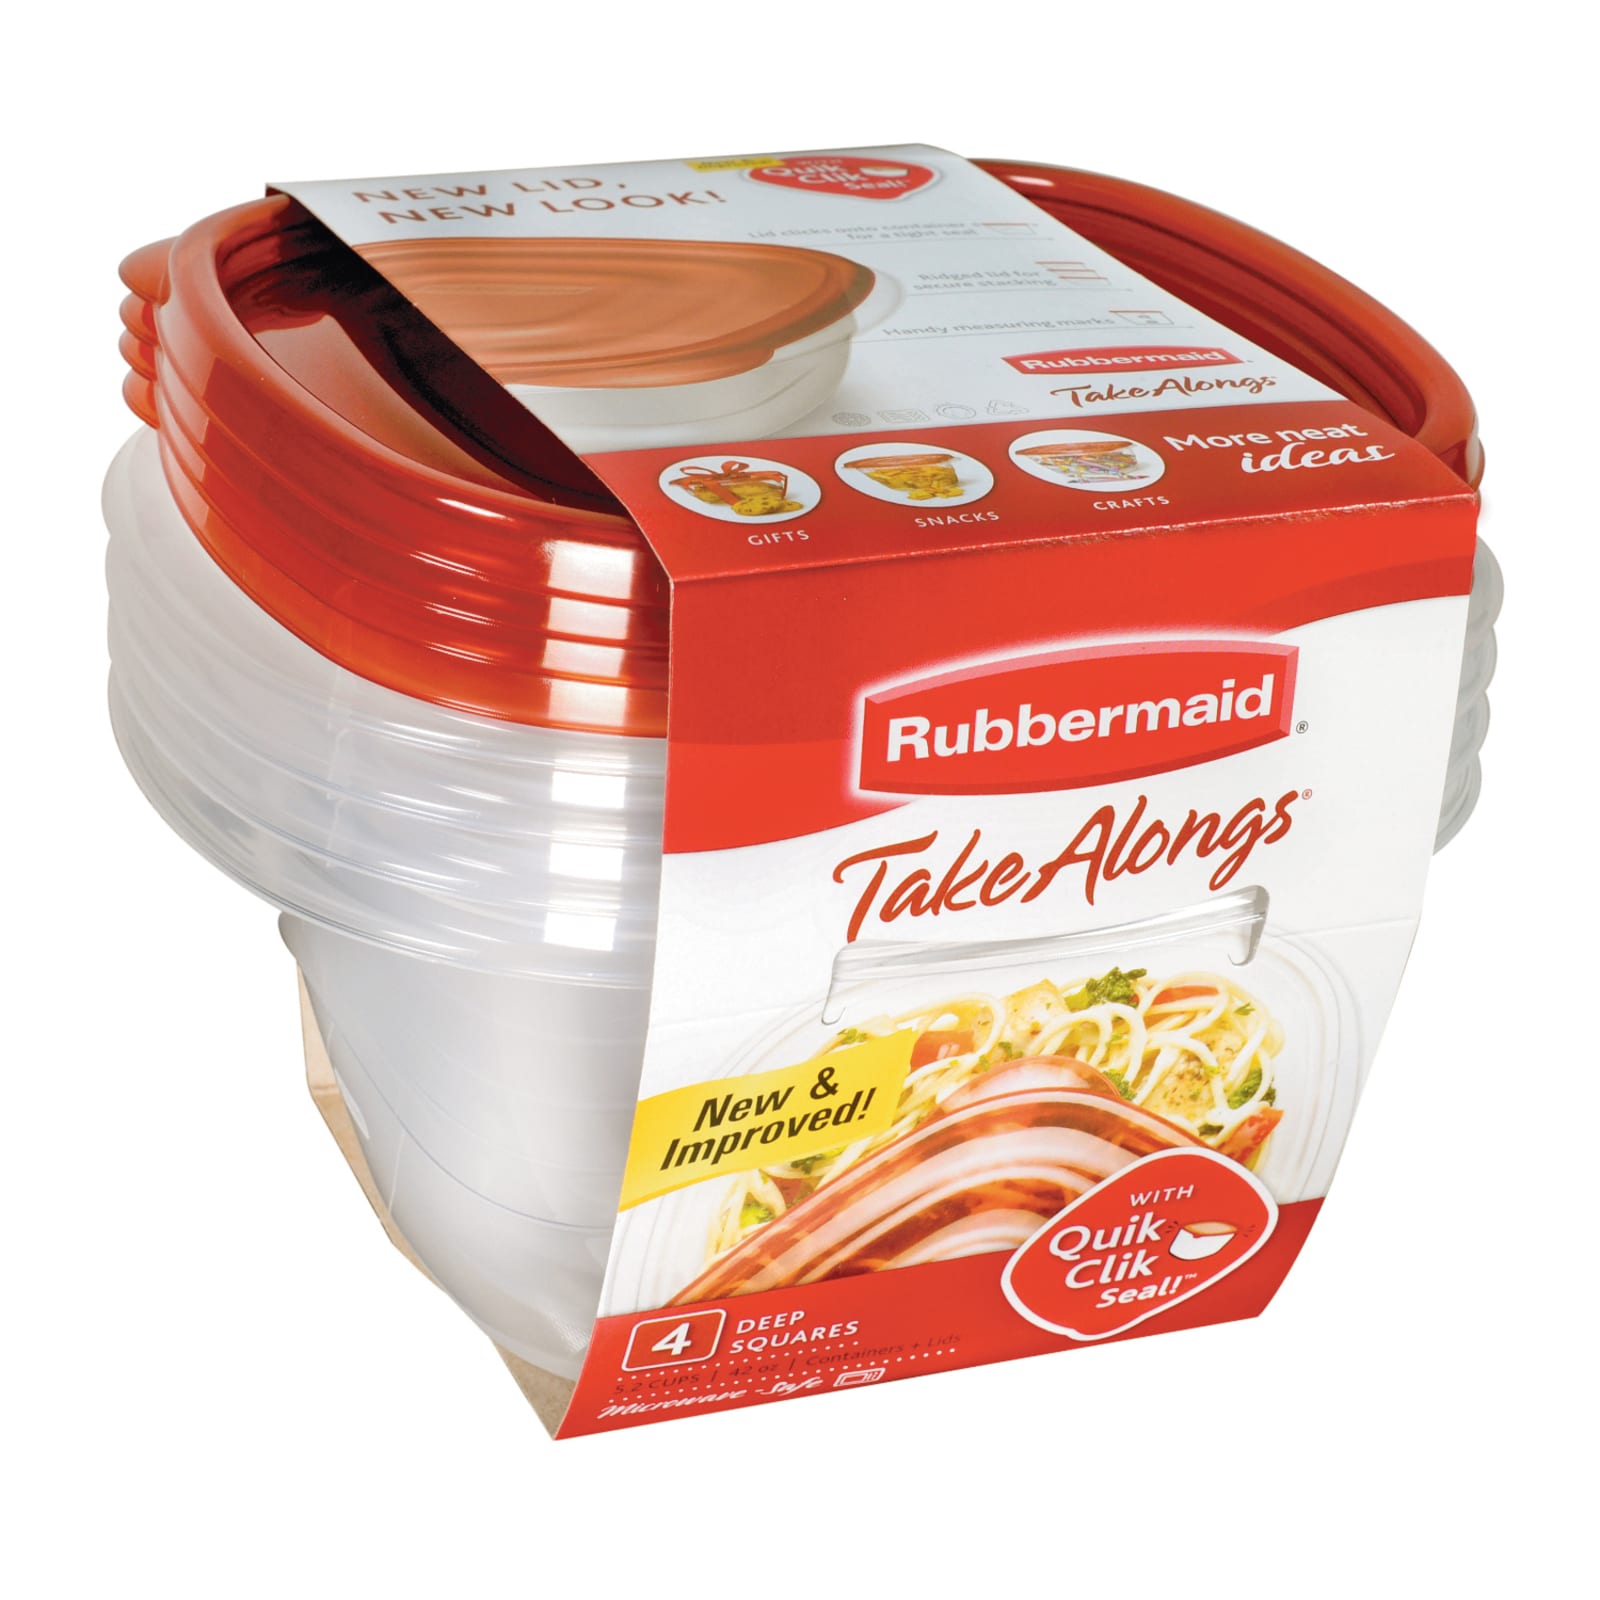 Easy Find 5-Cup Container by Rubbermaid at Fleet Farm